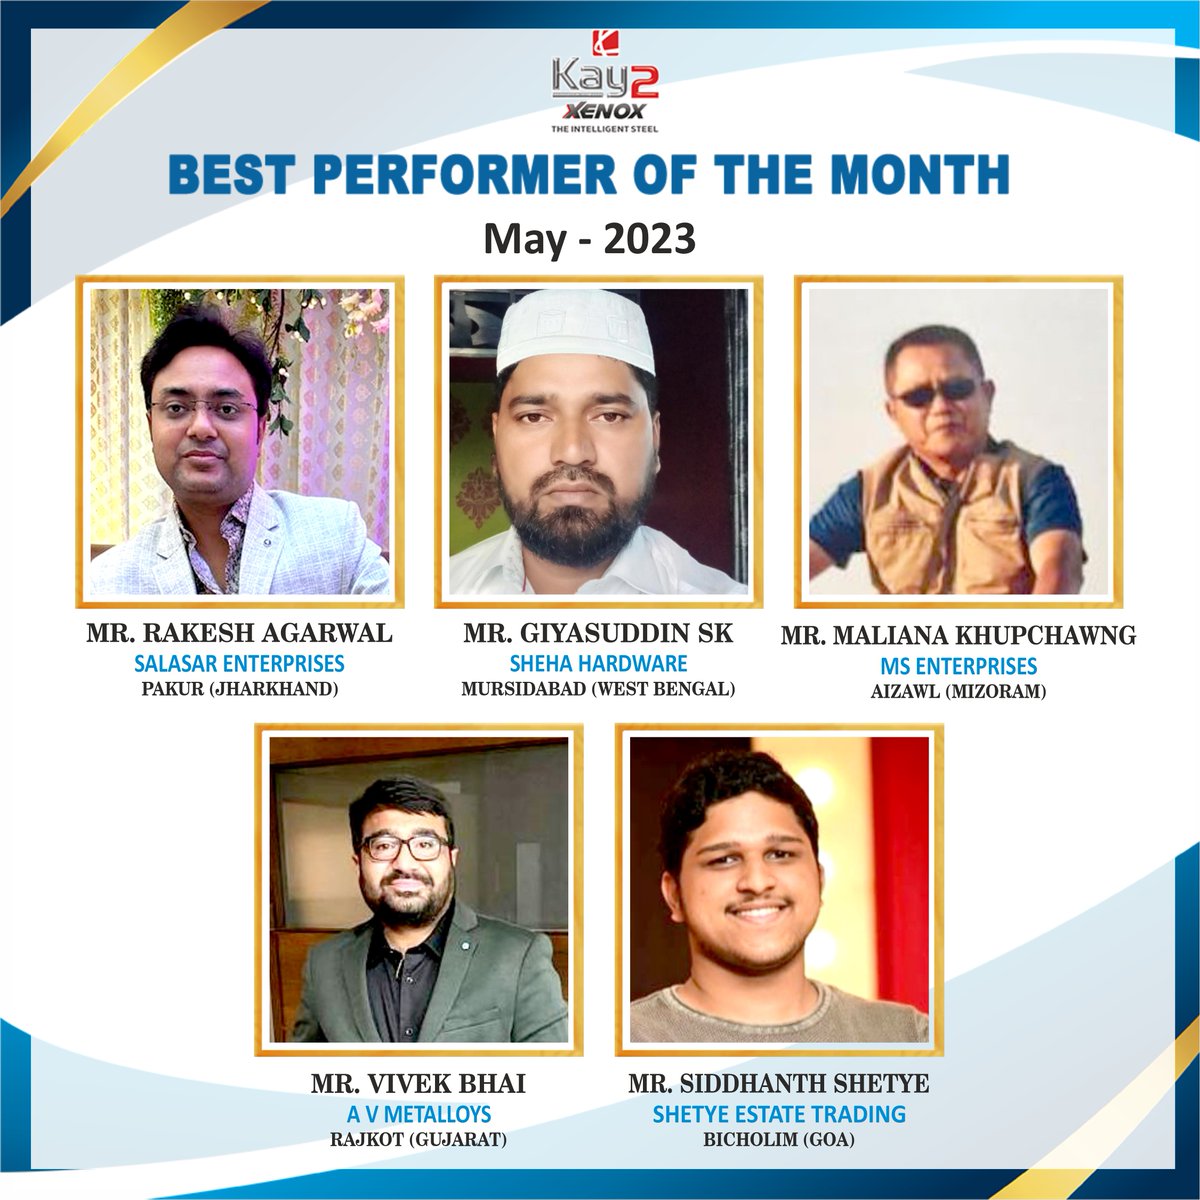 Their unwavering dedication, tireless efforts and exceptional talent have raised the bar for excellence & showcased their relentless passion for our company. We extend our heartfelt congratulations for their outstanding contributions. 

#DealerOfTheMonth #BestPerformer #Kay2Xenox